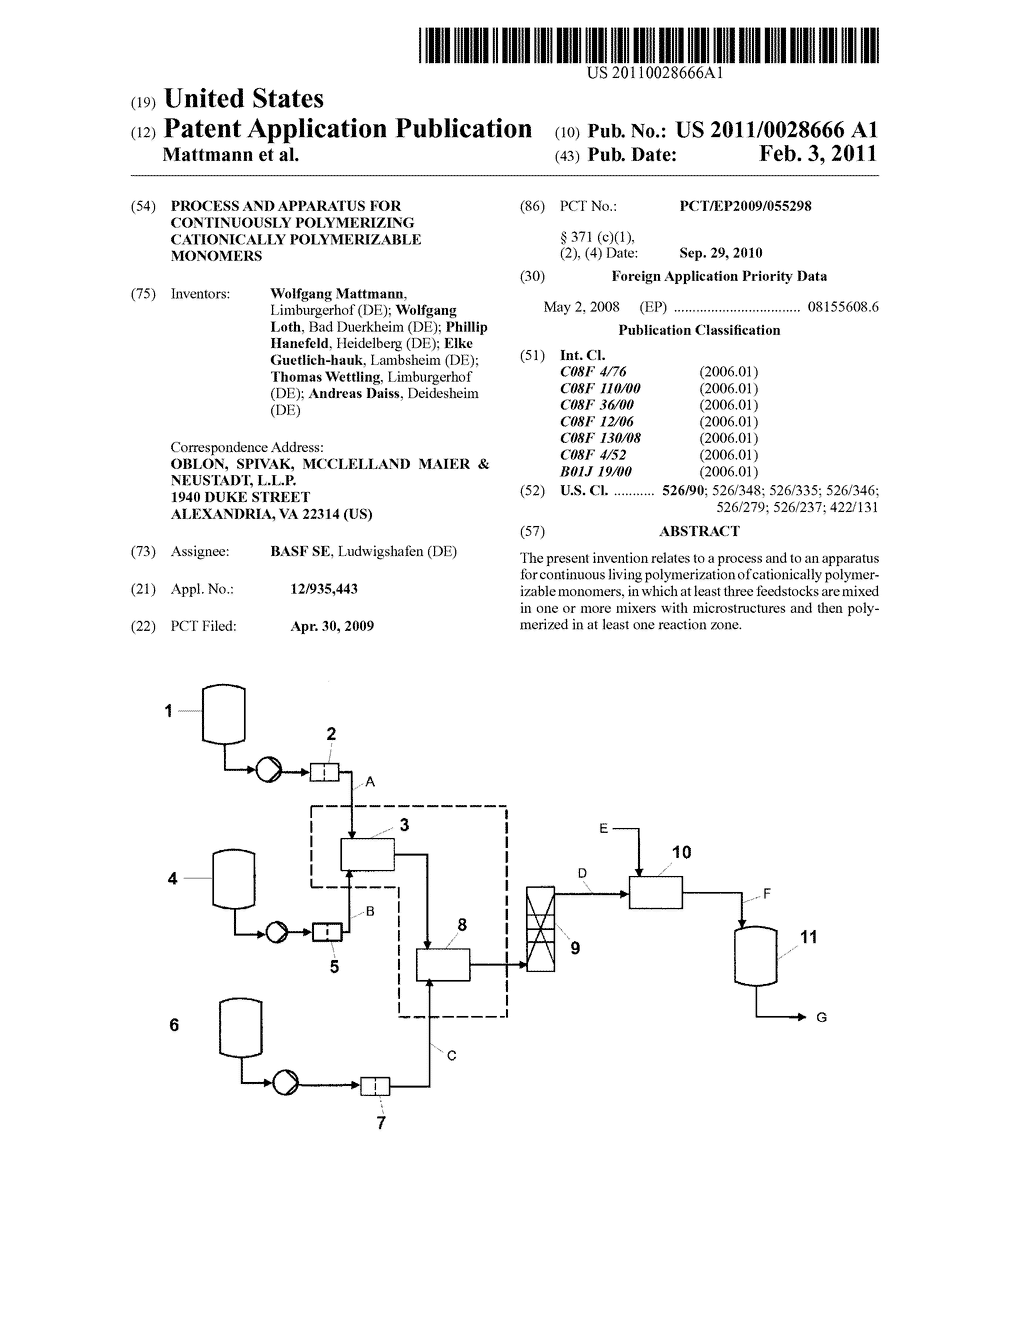 PROCESS AND APPARATUS FOR CONTINUOUSLY POLYMERIZING CATIONICALLY POLYMERIZABLE MONOMERS - diagram, schematic, and image 01